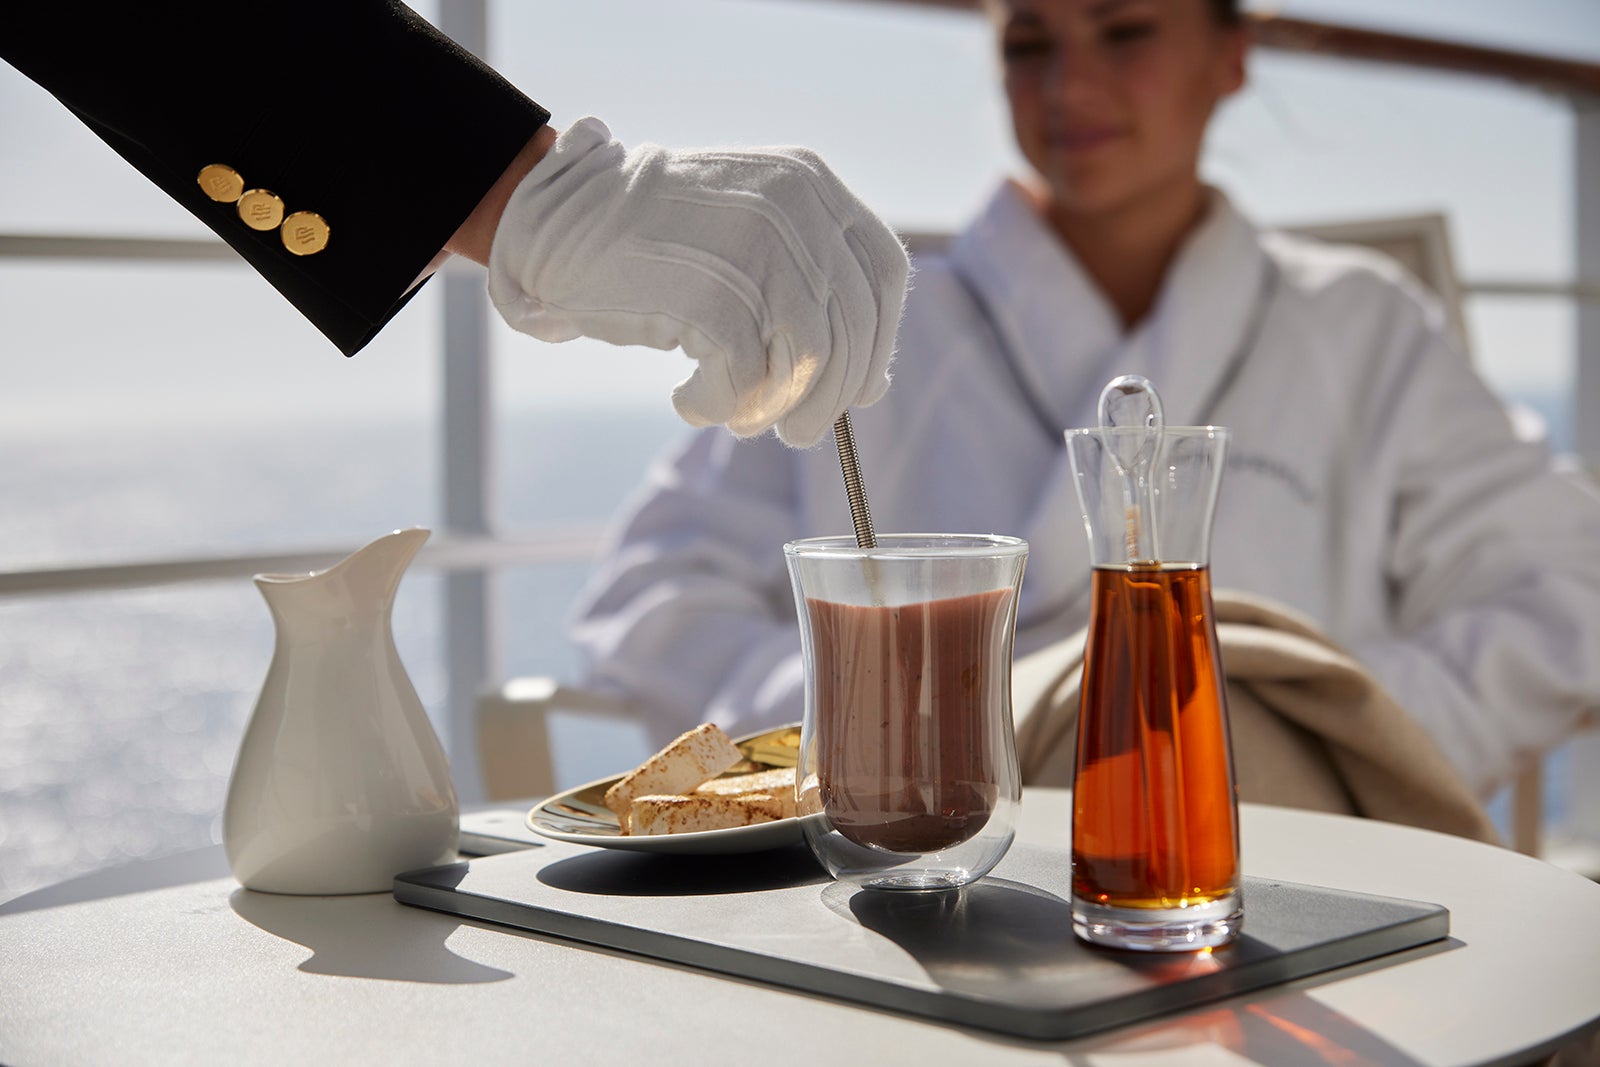 The white-gloved hand of a butler stirs tea on a cruise ship balcony as a passenger in a bathrobe looks on in the background